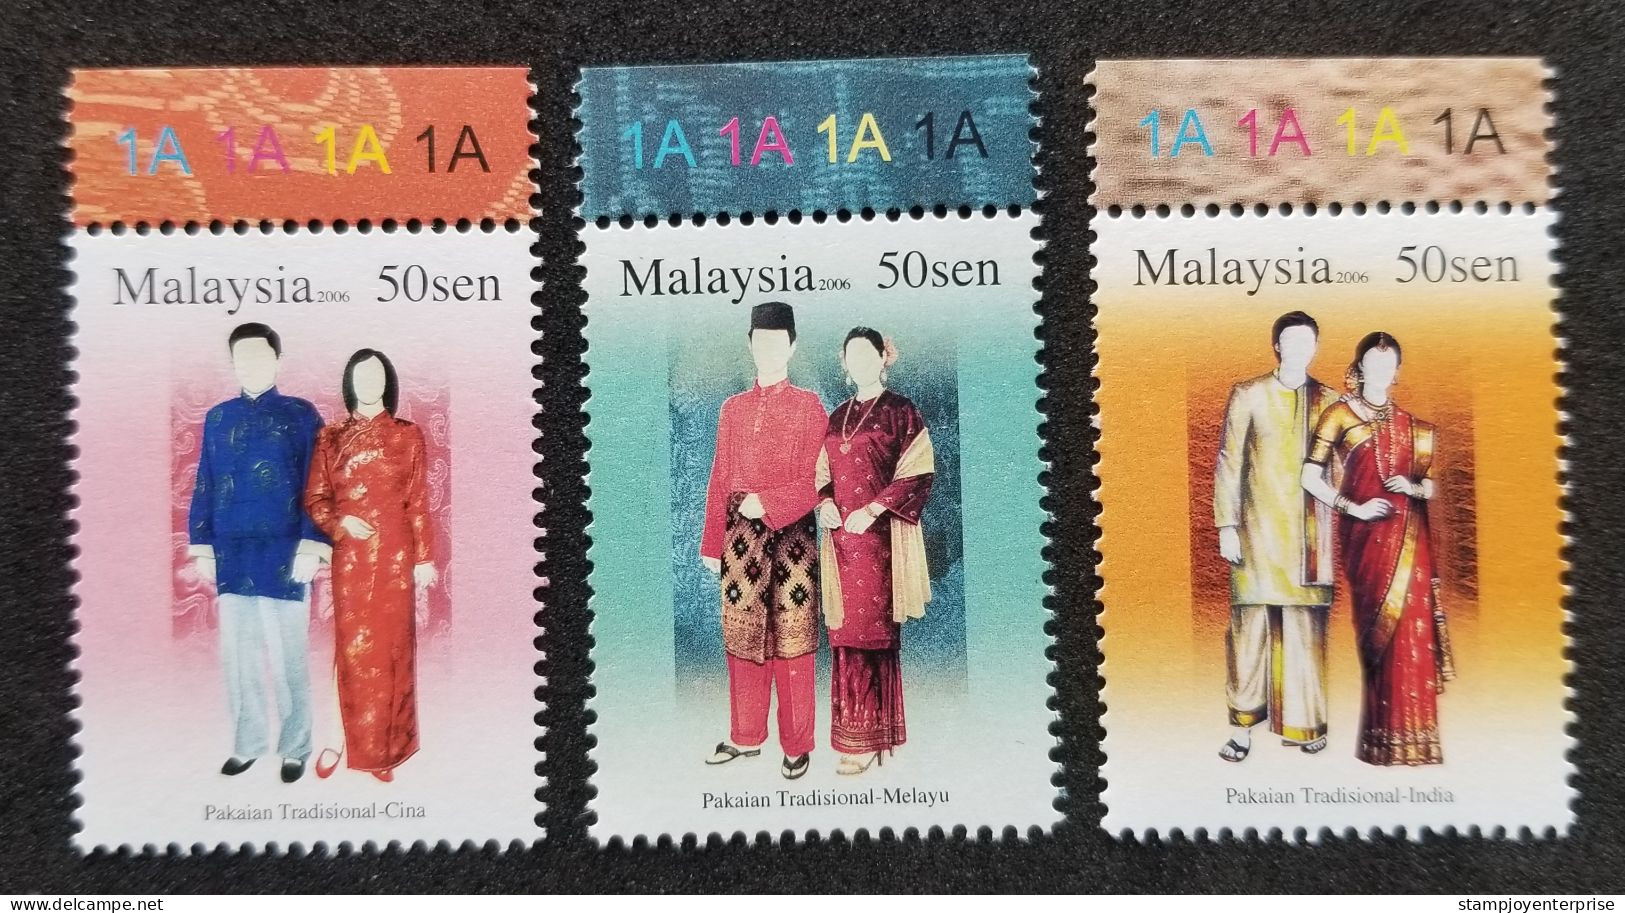 Malaysia Traditional Costumes 2006 Attire Costume Culture Cloth Art Chinese India Malay (stamp Plate) MNH - Malaysia (1964-...)